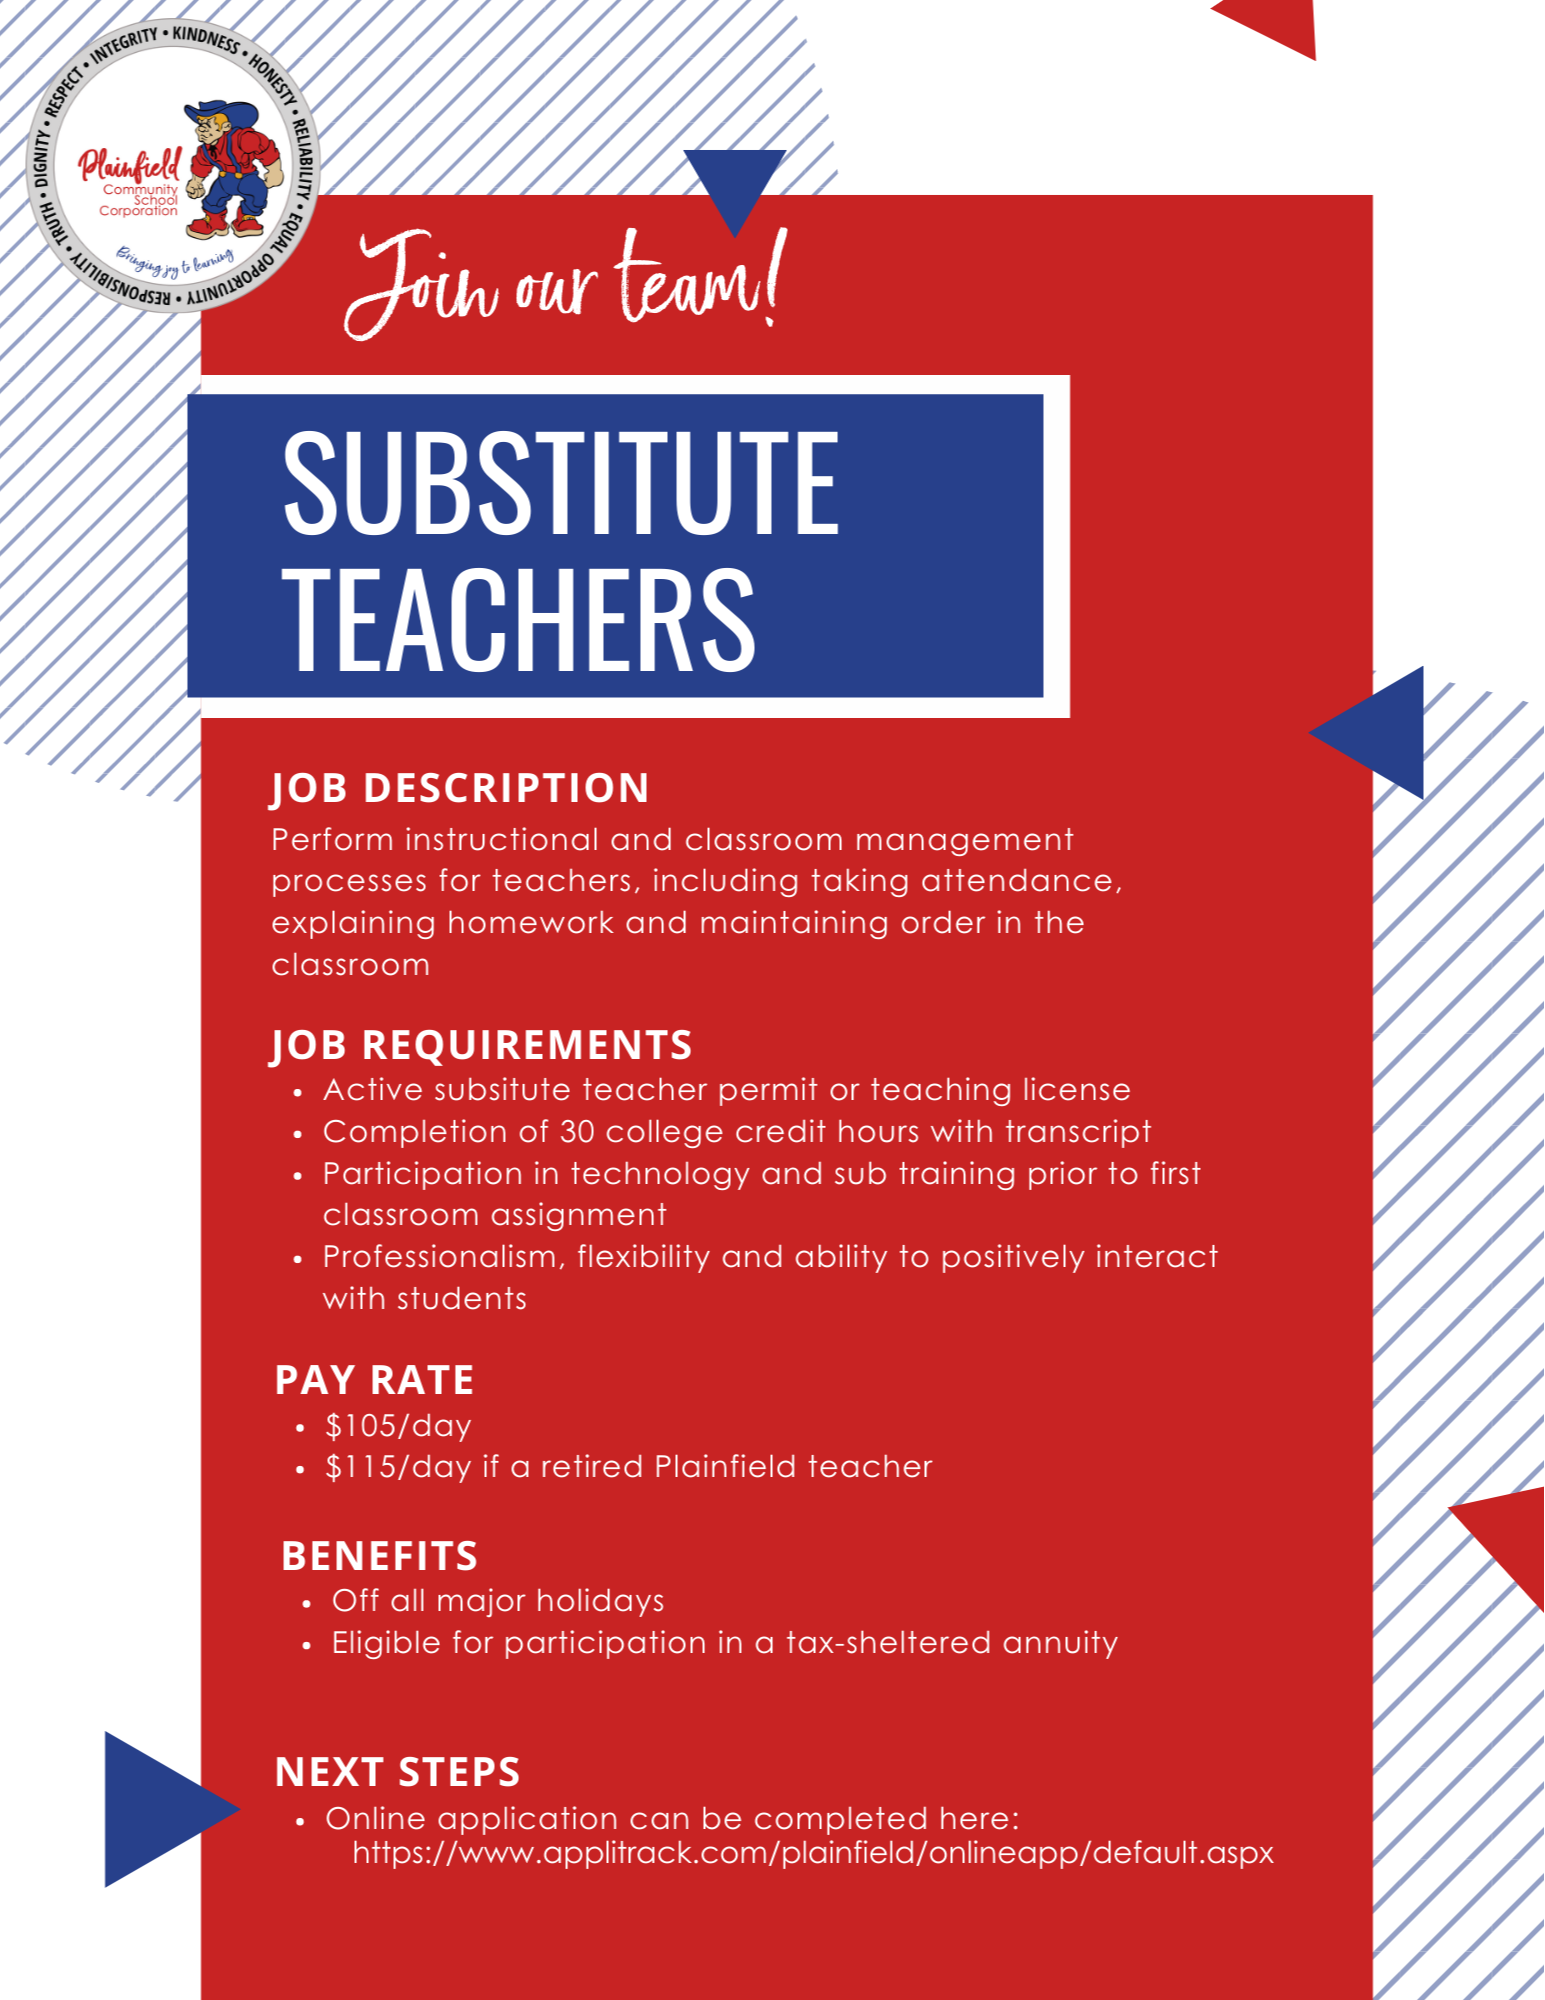 Information about being a substitute teacher in Plainfield Schools